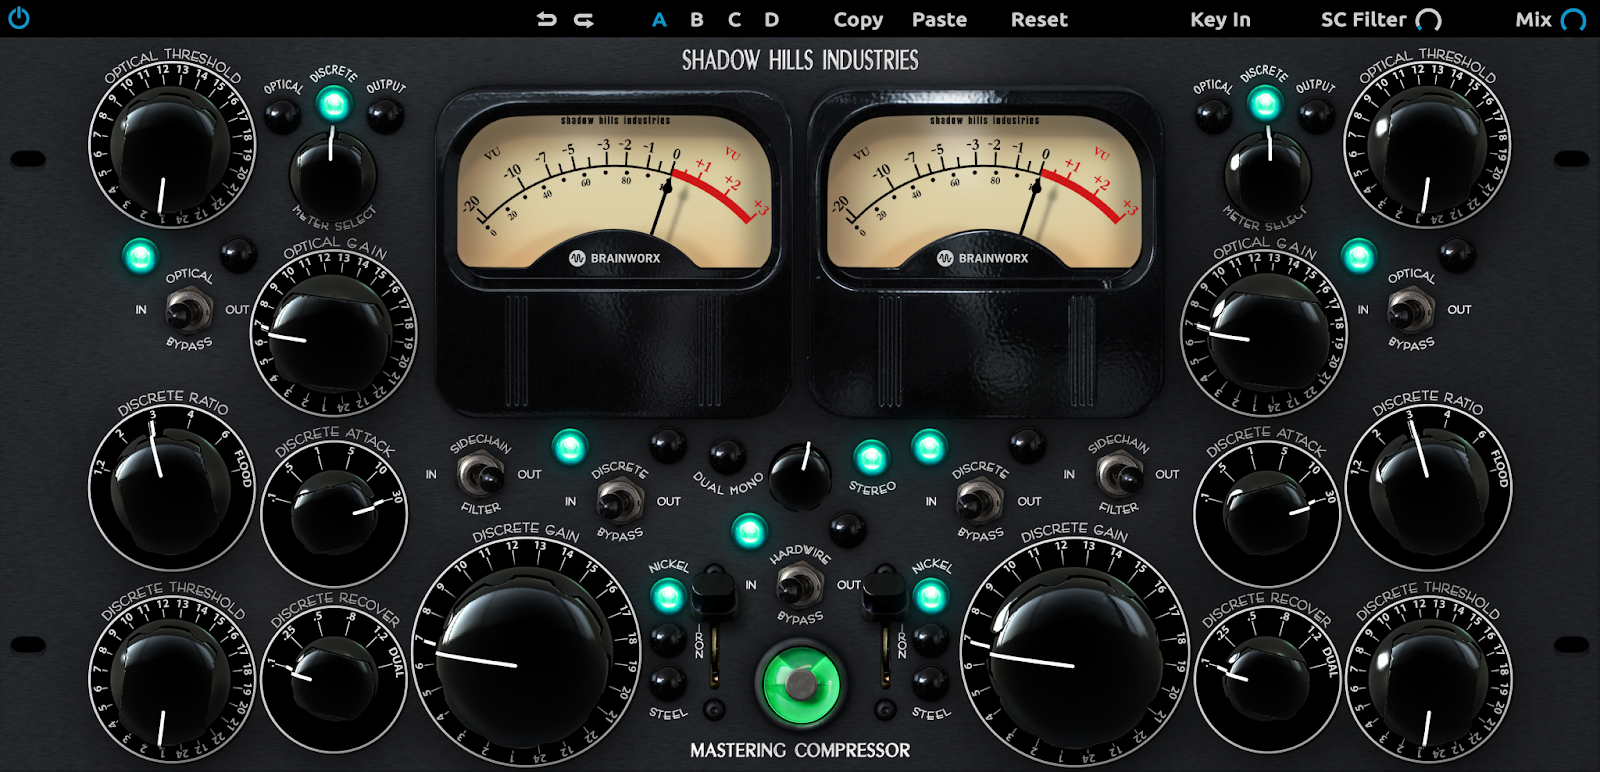 Shadow Hills Mastering Compressor - Best well-rounded compressor